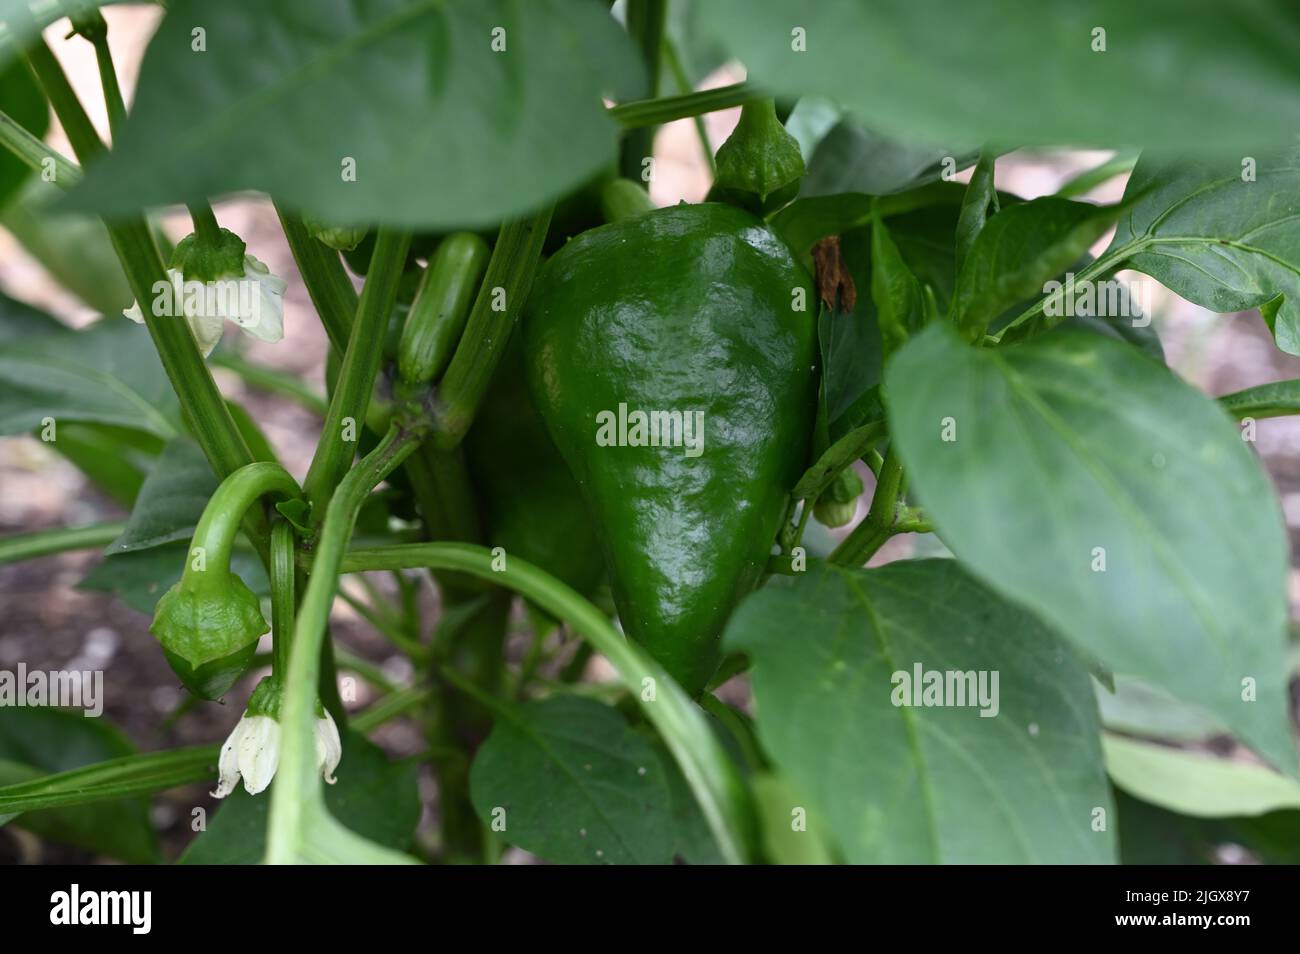 A closeup of green Lesya pepper grown on a plant Stock Photo